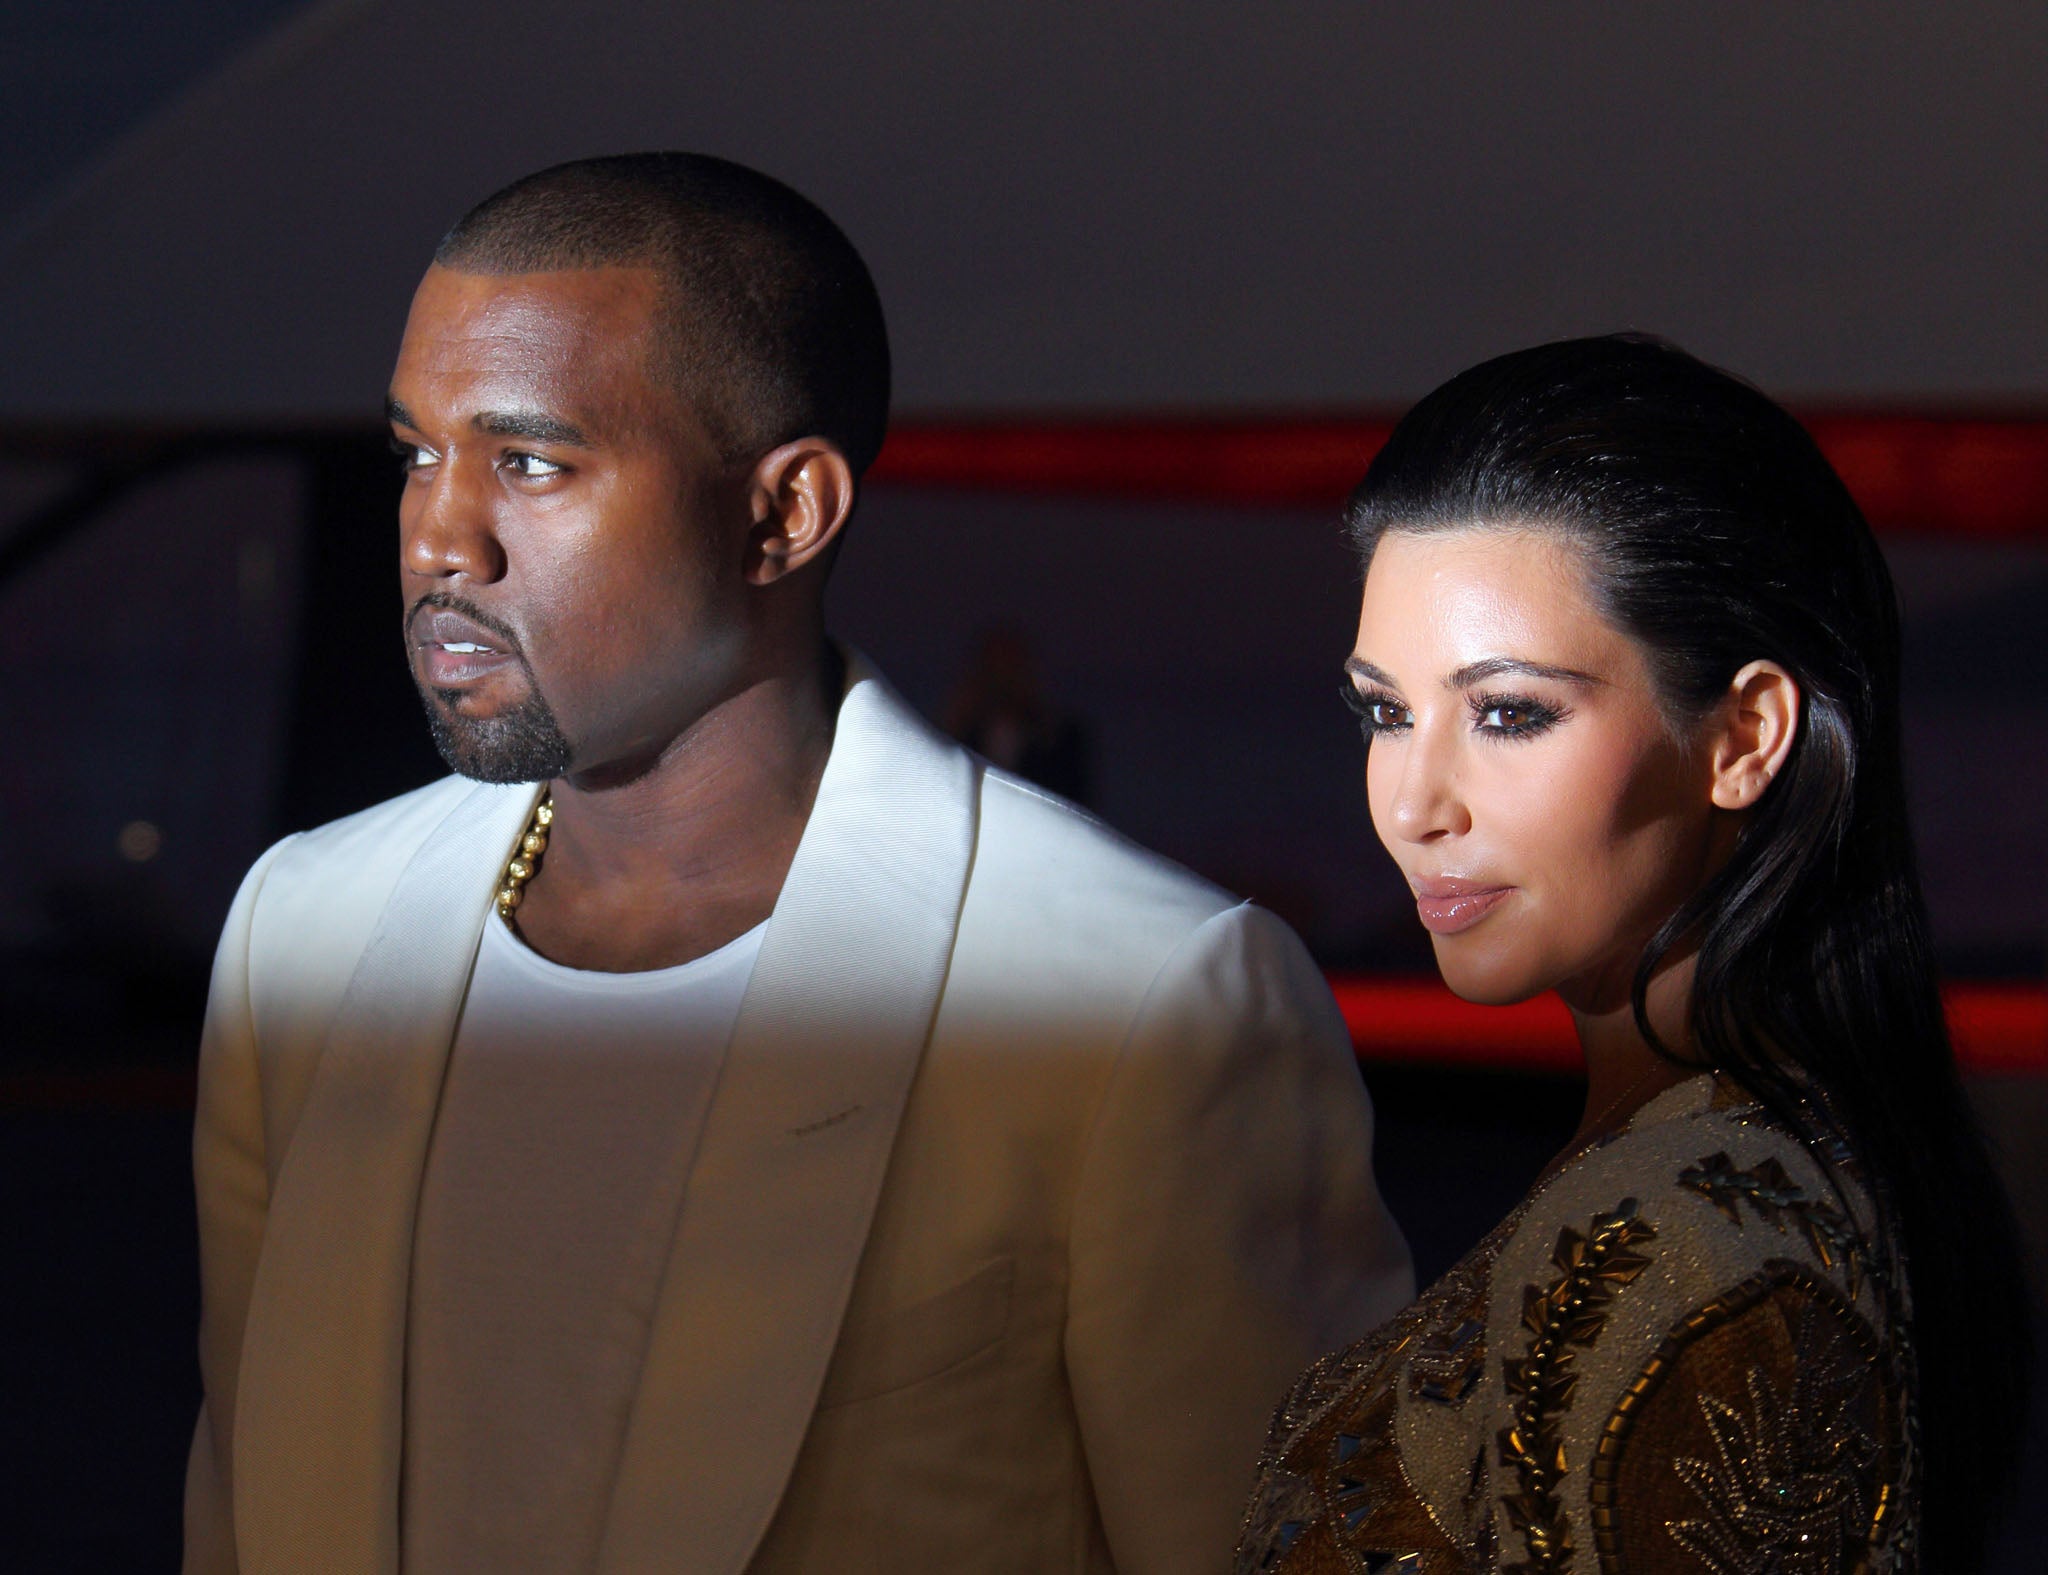 Kanye West’s delusional statements of grandeur reached such heights, many believed an entirely fictitious story